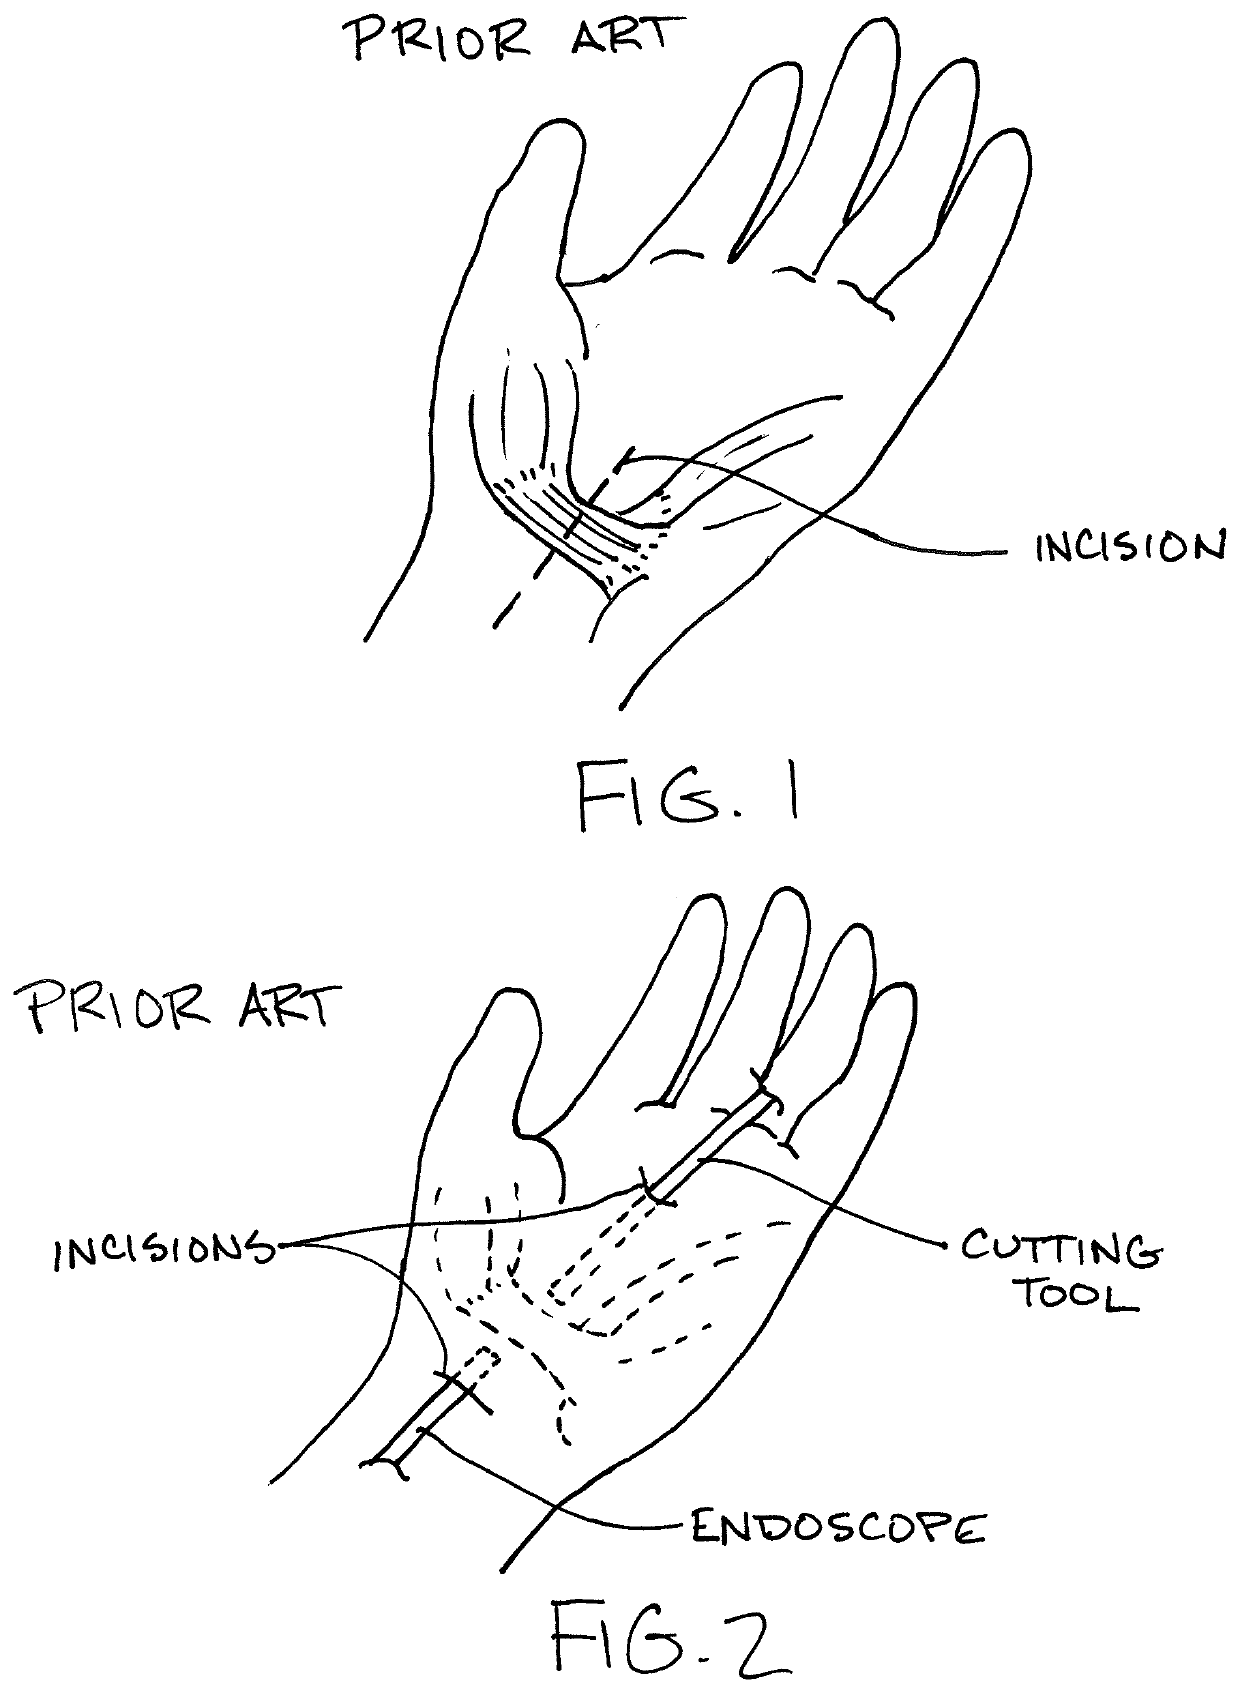 Surgical tool and method of use for carpel tunnel release procedure